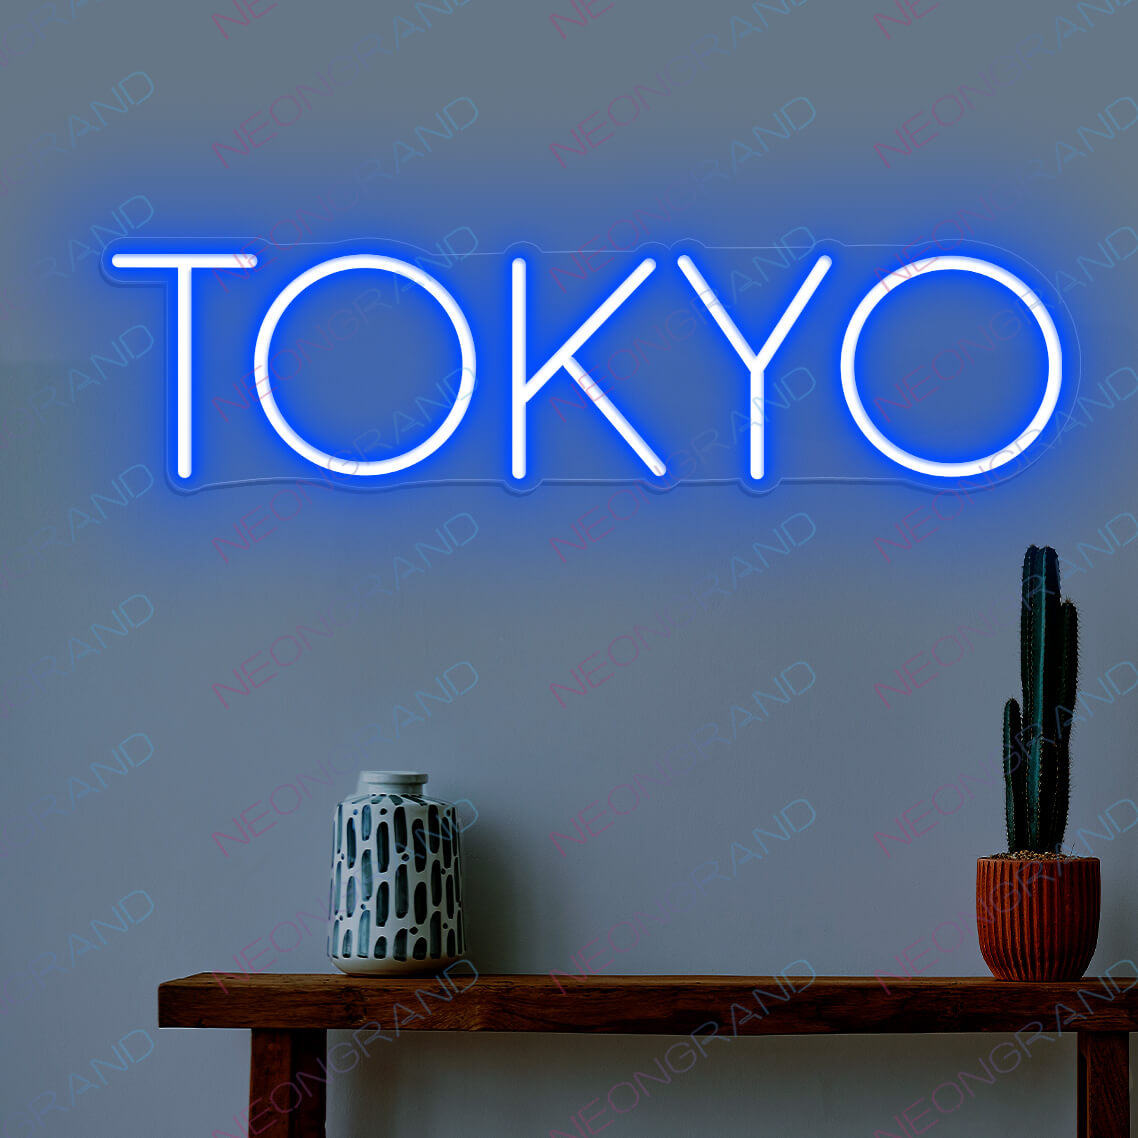 Tokyo Neon Sign Led Light, Japanese Neon Signs blue